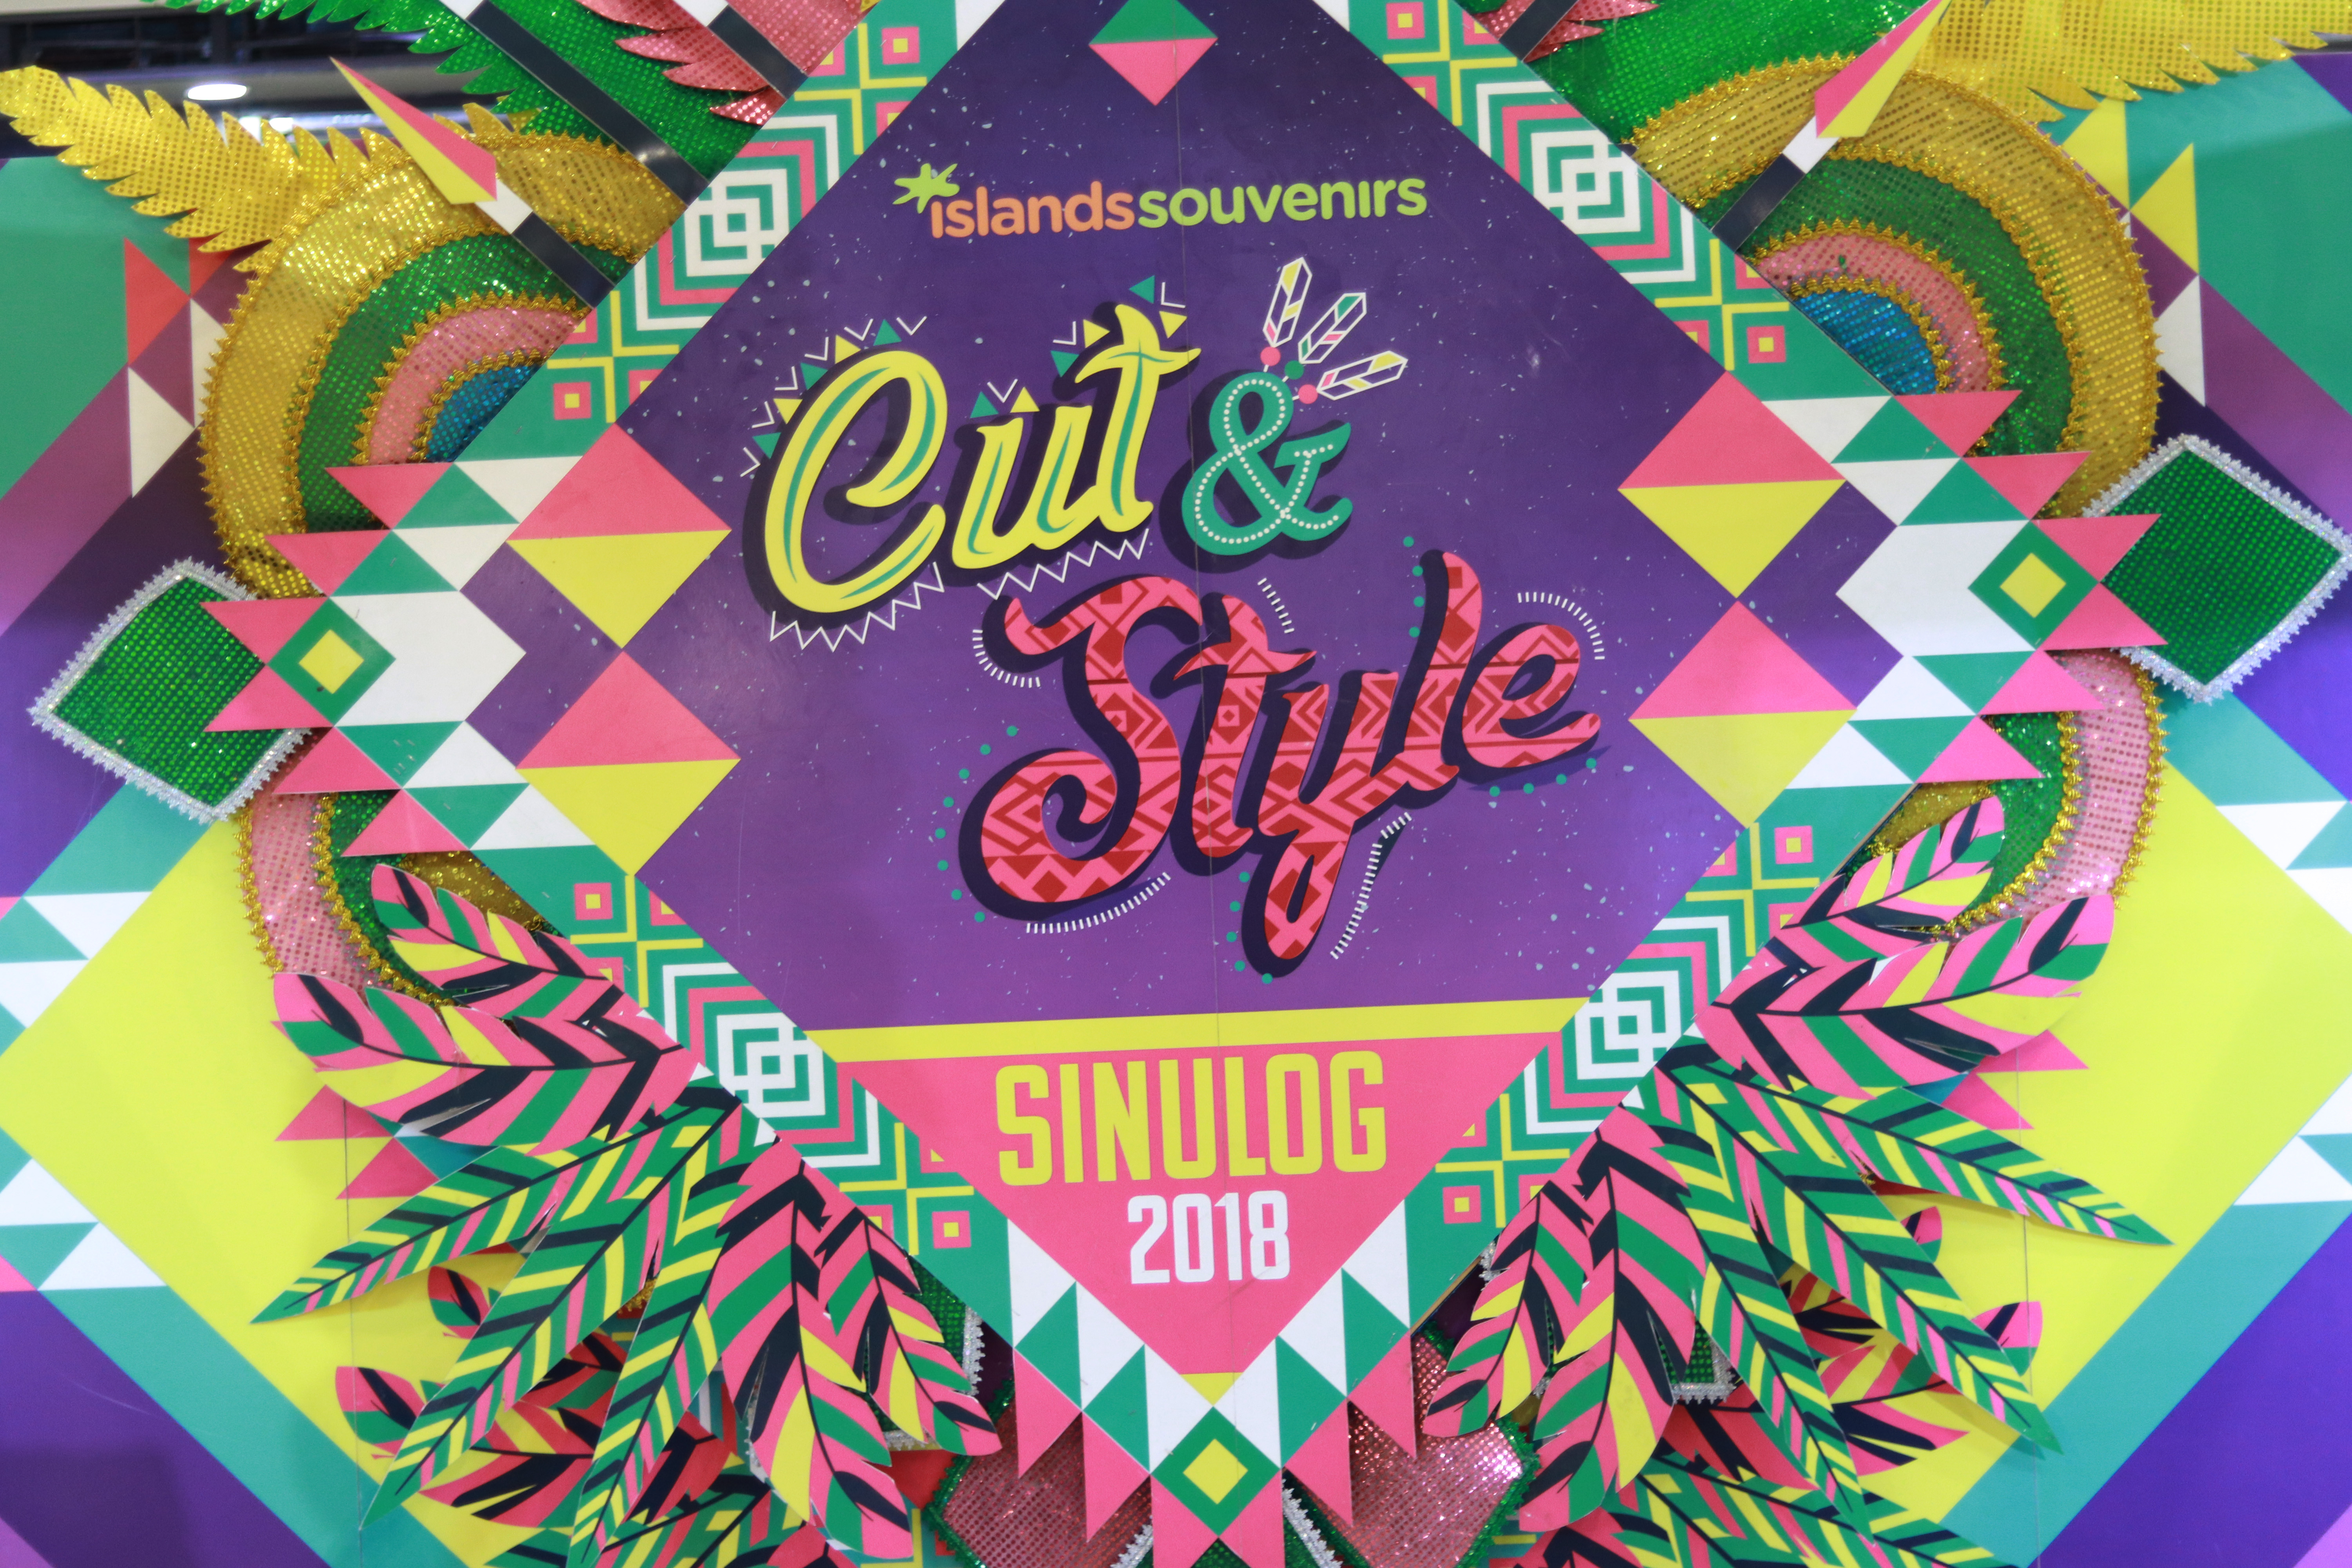 Cut & Style Your Way Into Sinulog 2018 with Islands